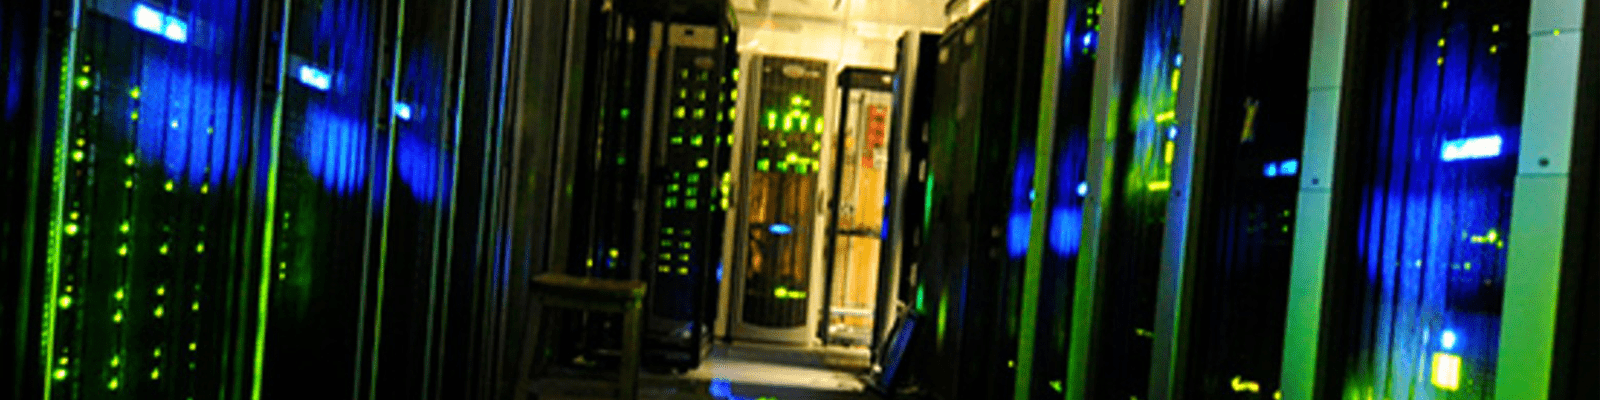 a server room with loads of servers in cabinets 